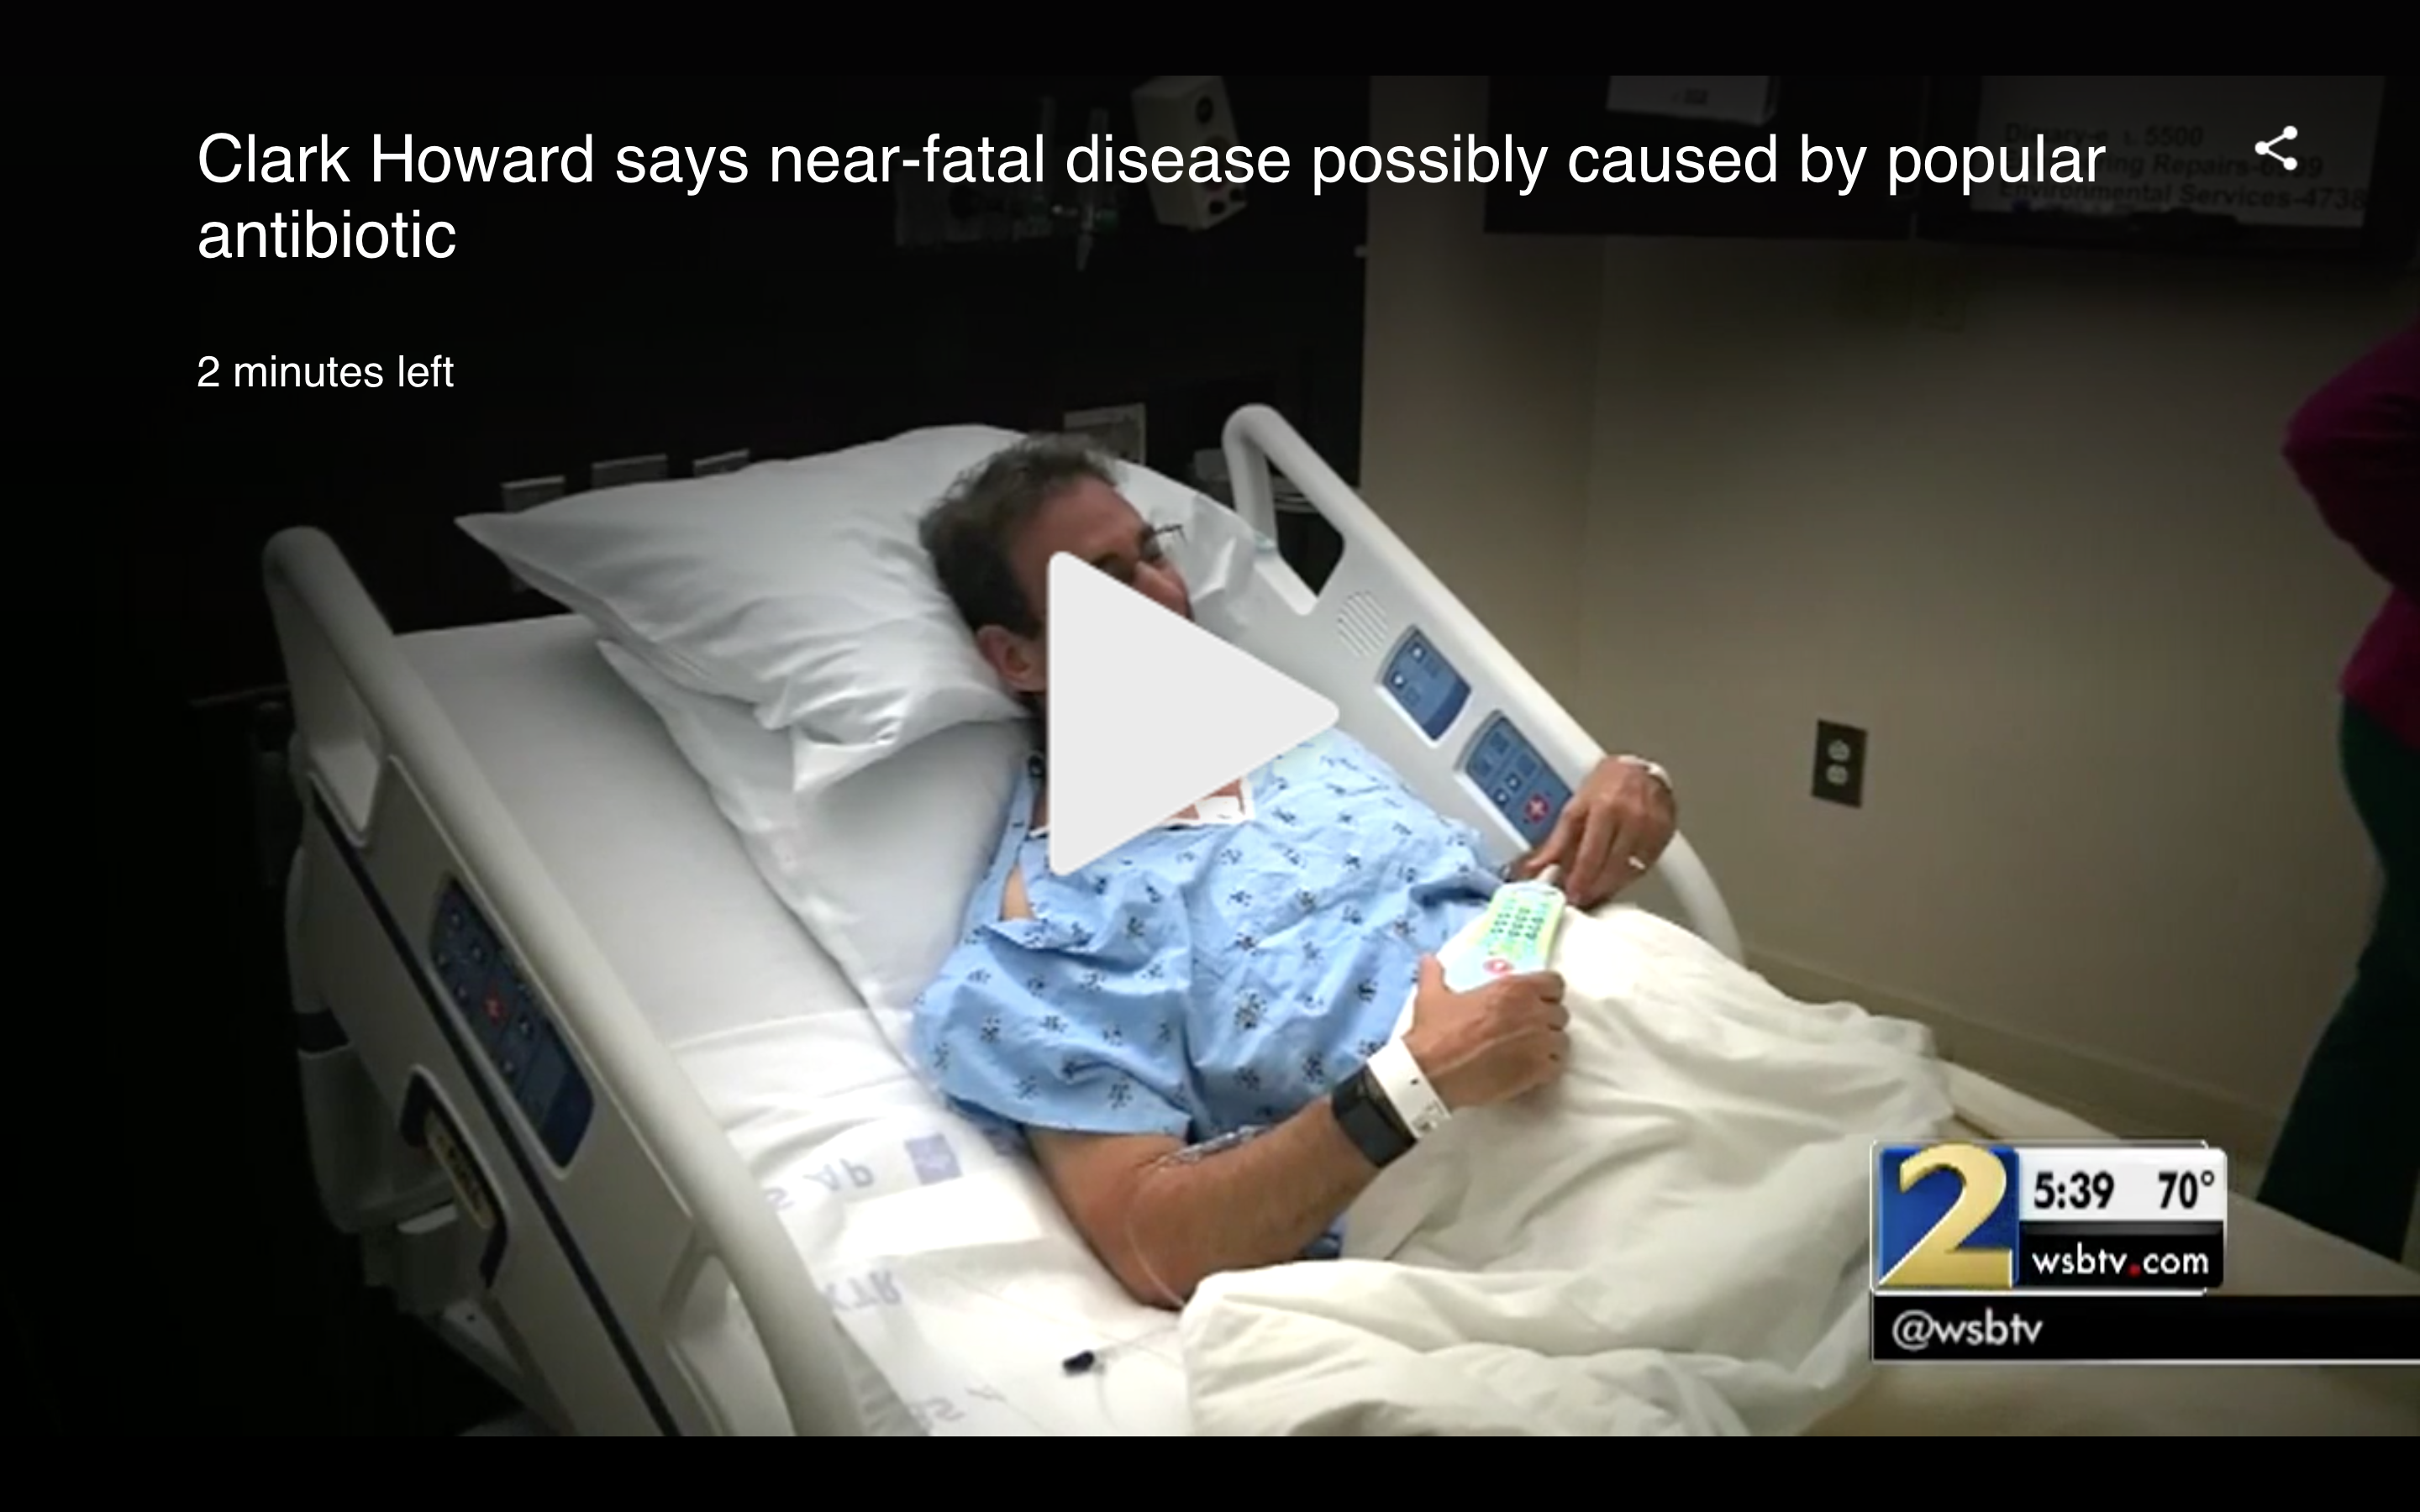 WSB-TV: Man Nearly Dies From Fatal Disease After Taking This Popular Antibiotic